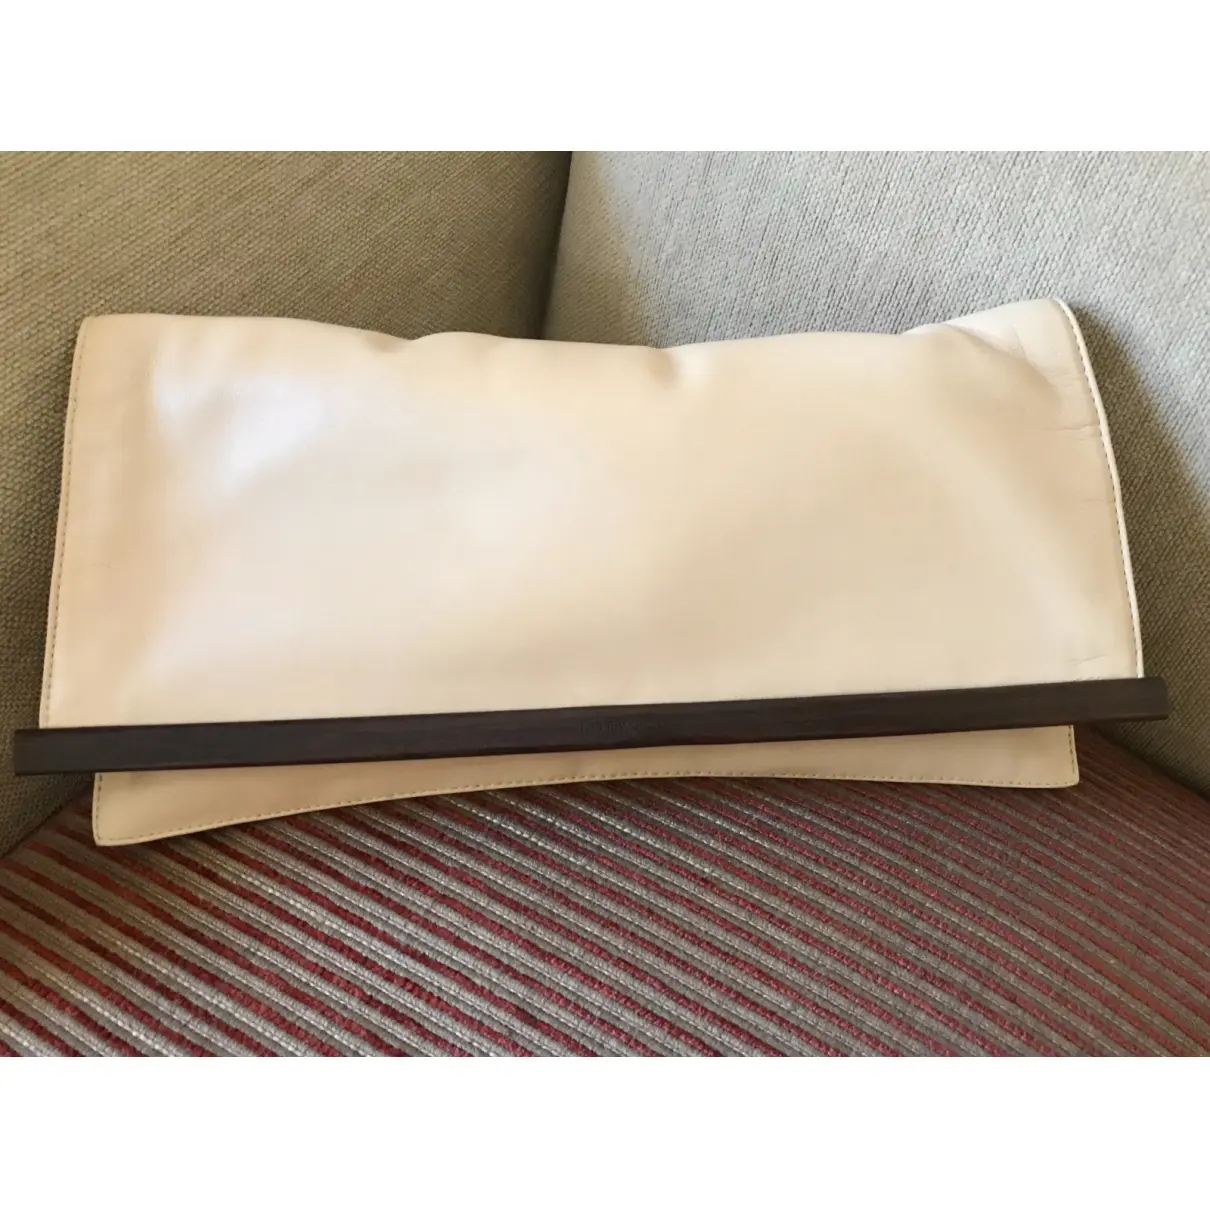 Loewe Leather clutch bag for sale